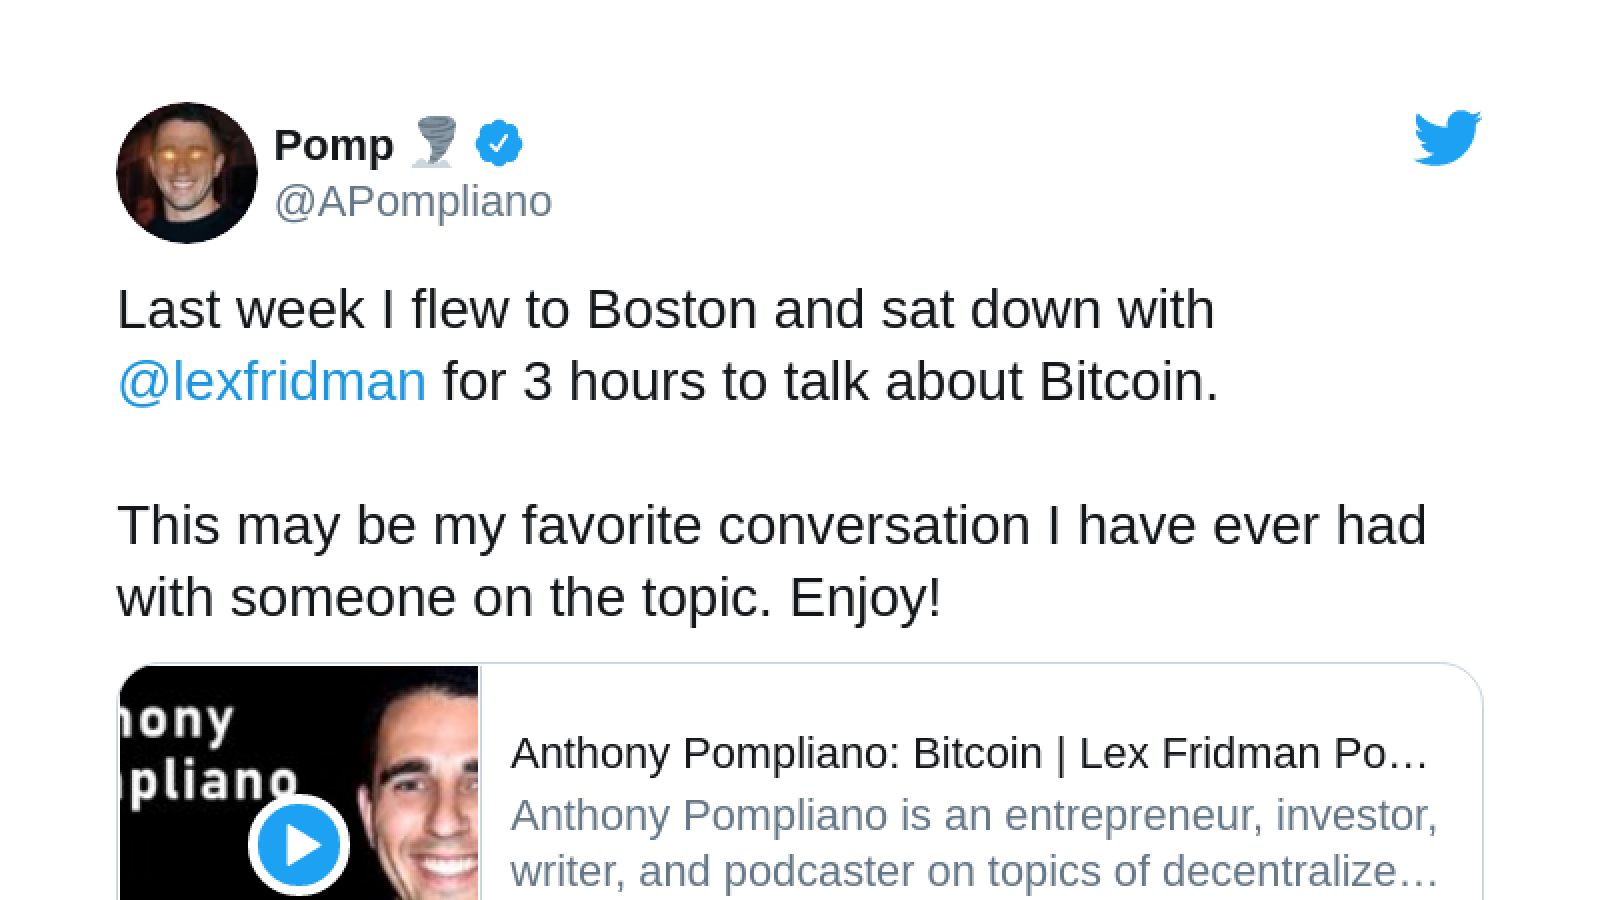 Lex Fridman and Anthony Pompliano talked about Bitcoin (BTC)